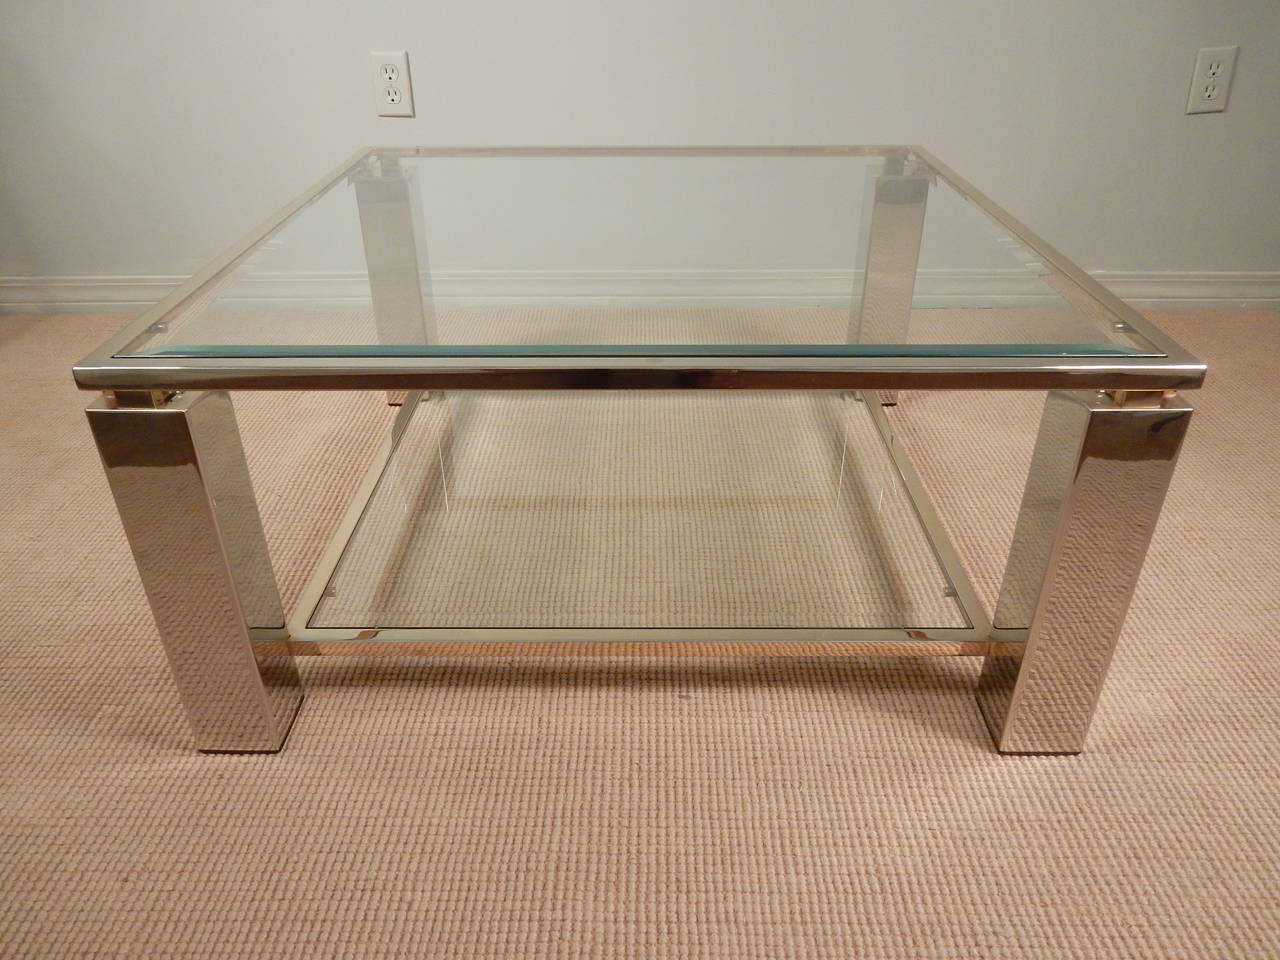 Square 1960's French chrome, glass and brass trimmed coffee table with beveled glass top and shelf.